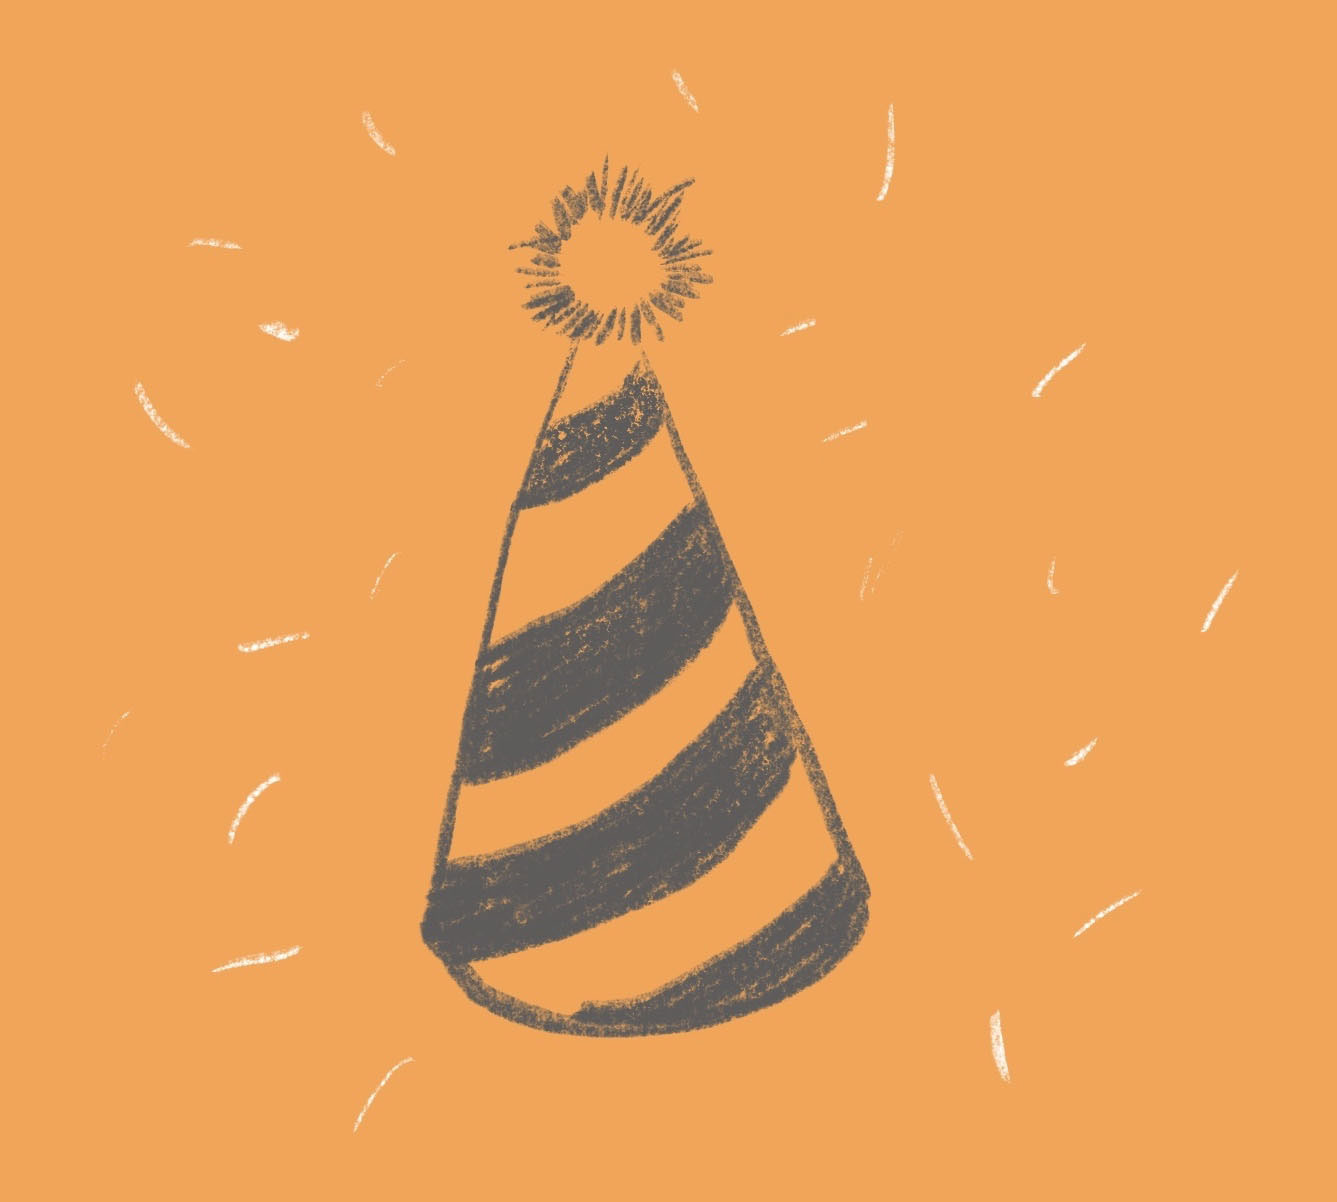 Illustration for the birthday card on the events page